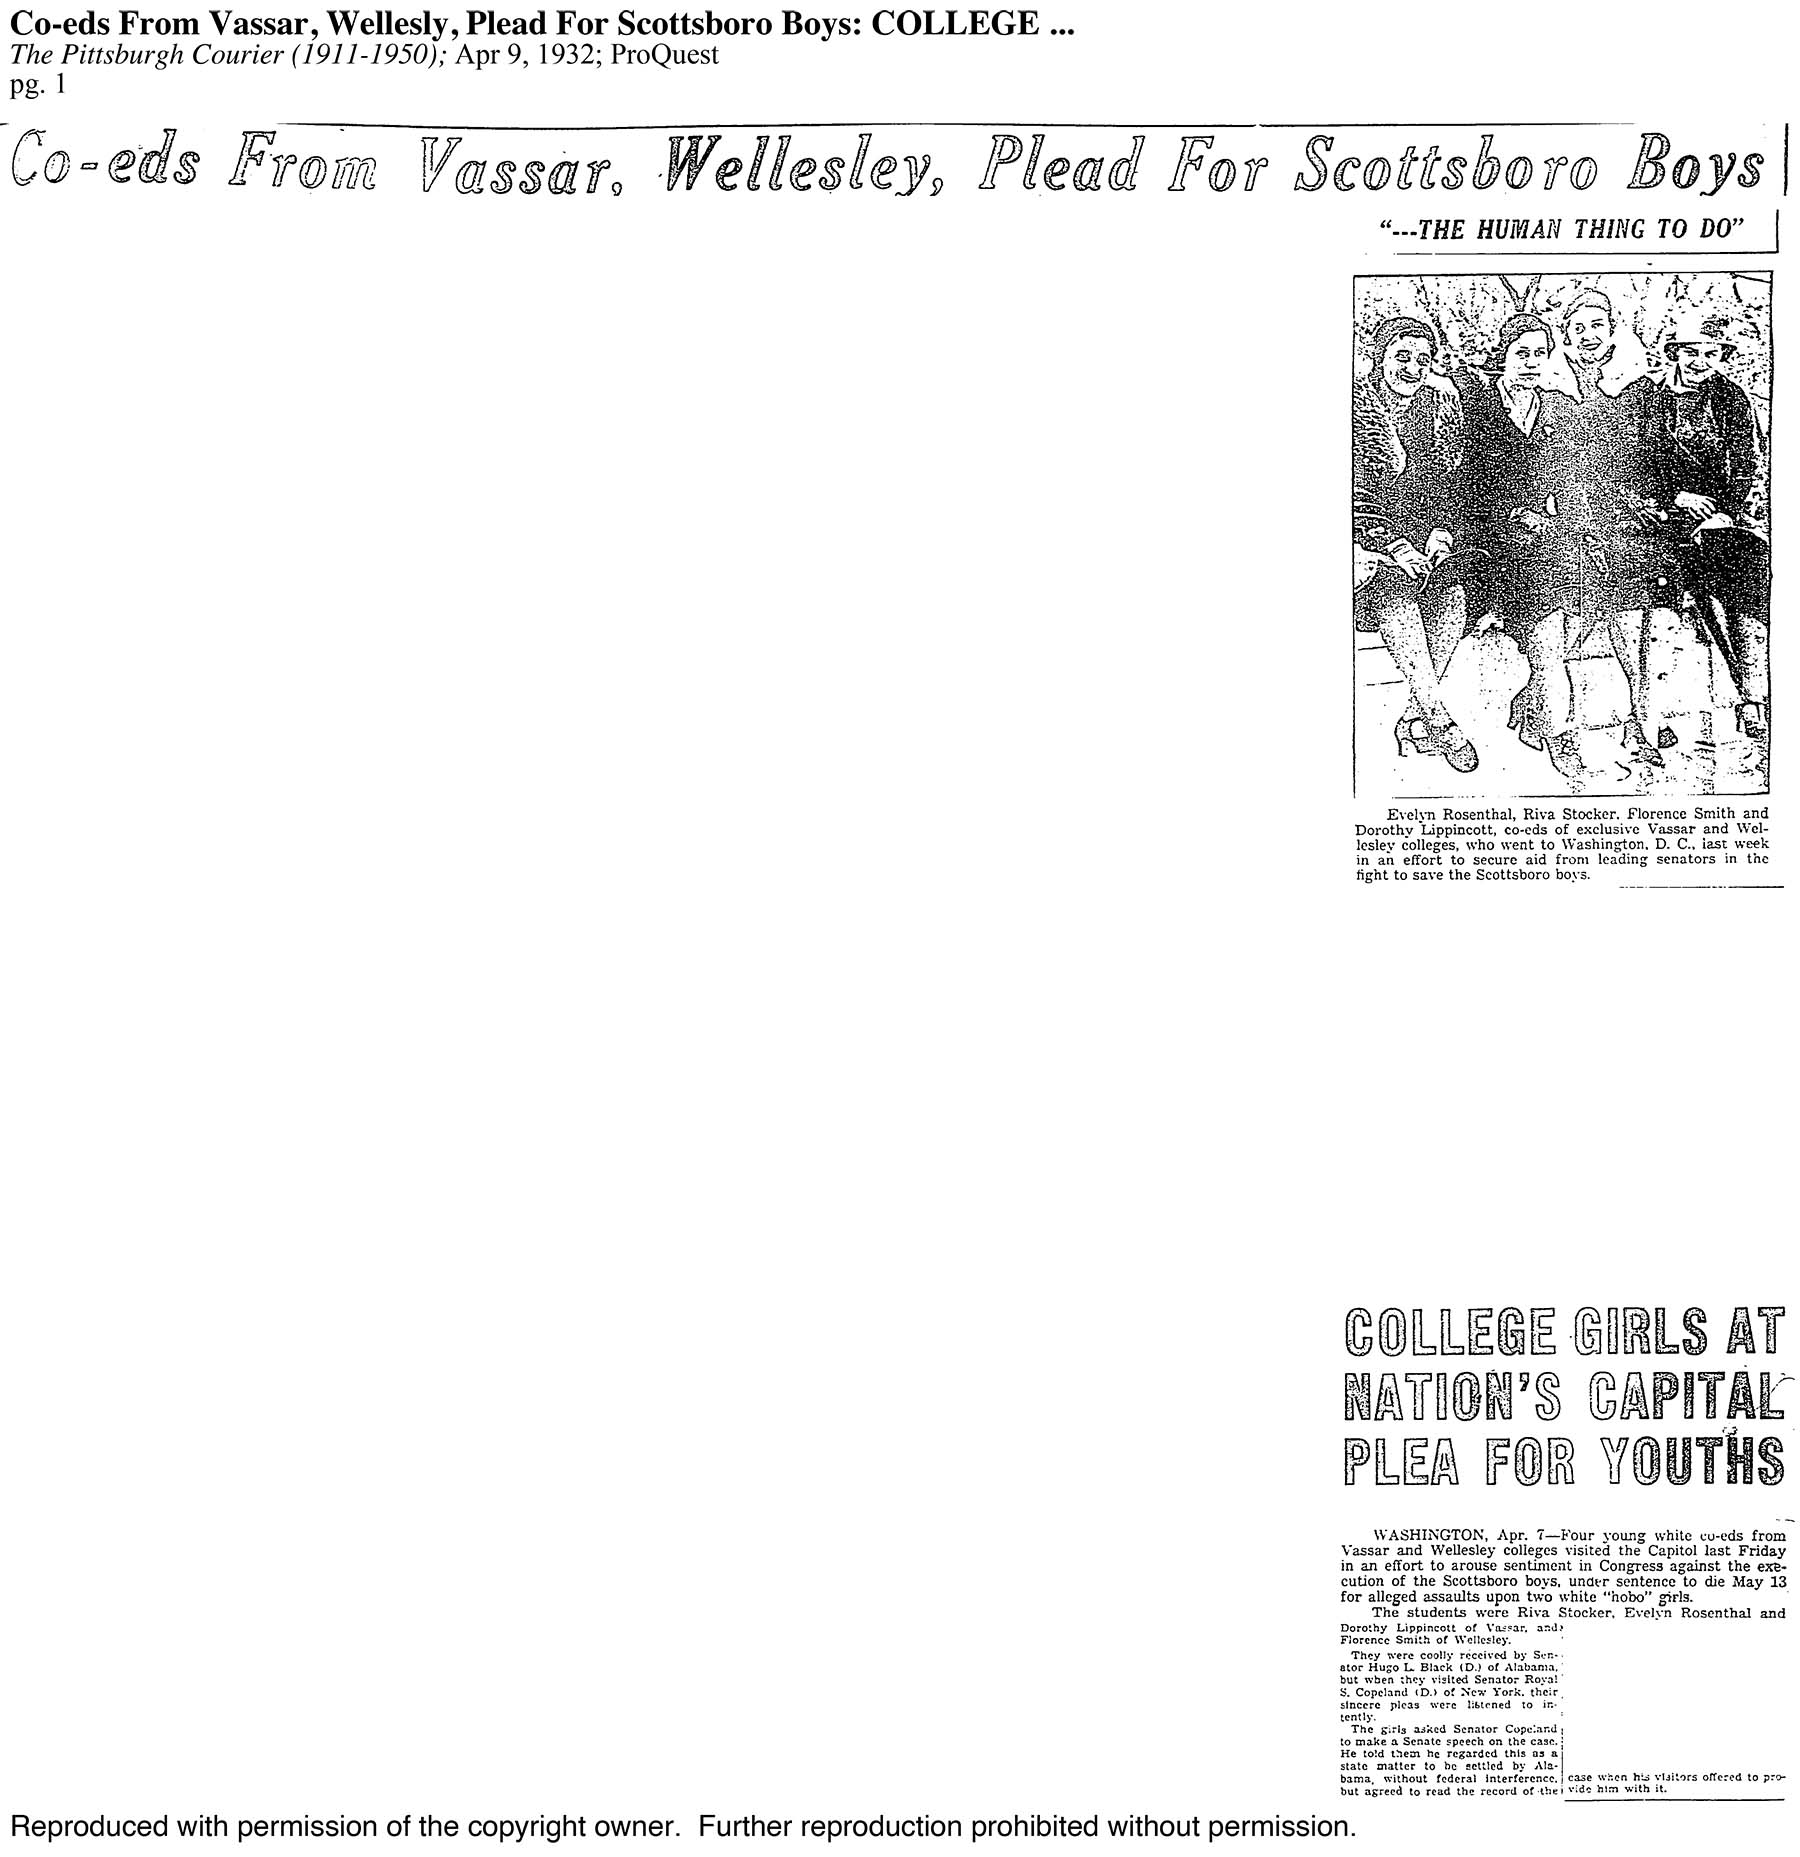 Original article scan for Co-eds From Vassar, Wellesly, Plead For Scottsboro Boys; The Pittsburgh Courier (1911-1950); Apr 9, 1932; ProQuest pg. 1